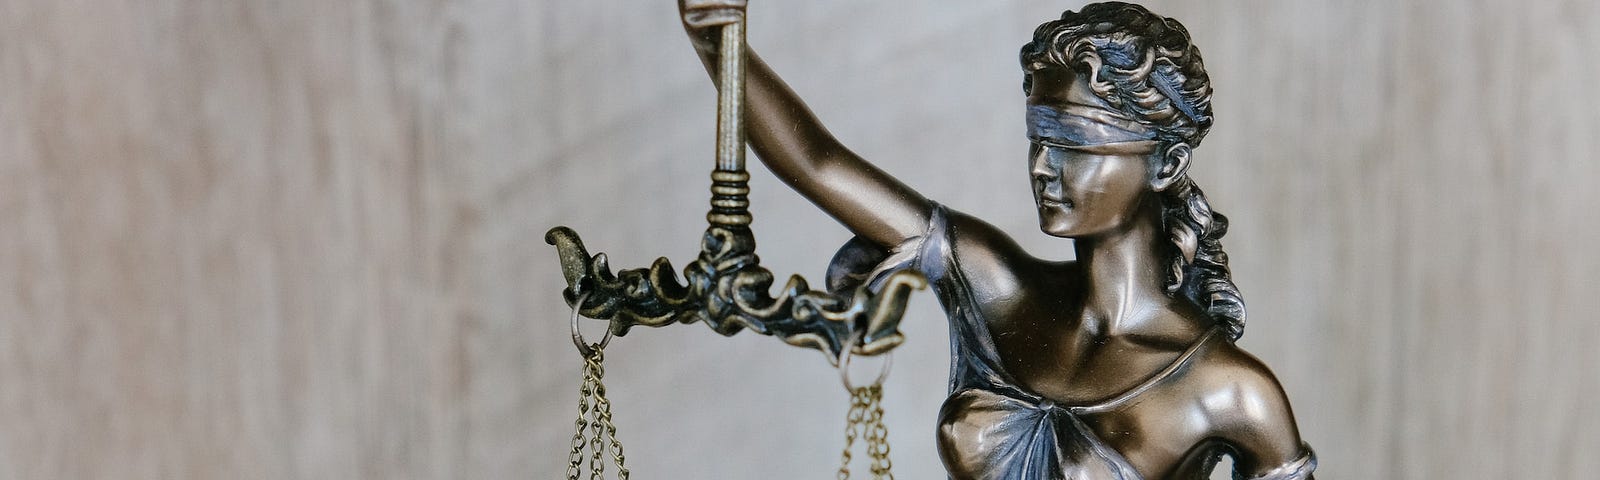 A bronze statue of Lady Justice holding a set of scales